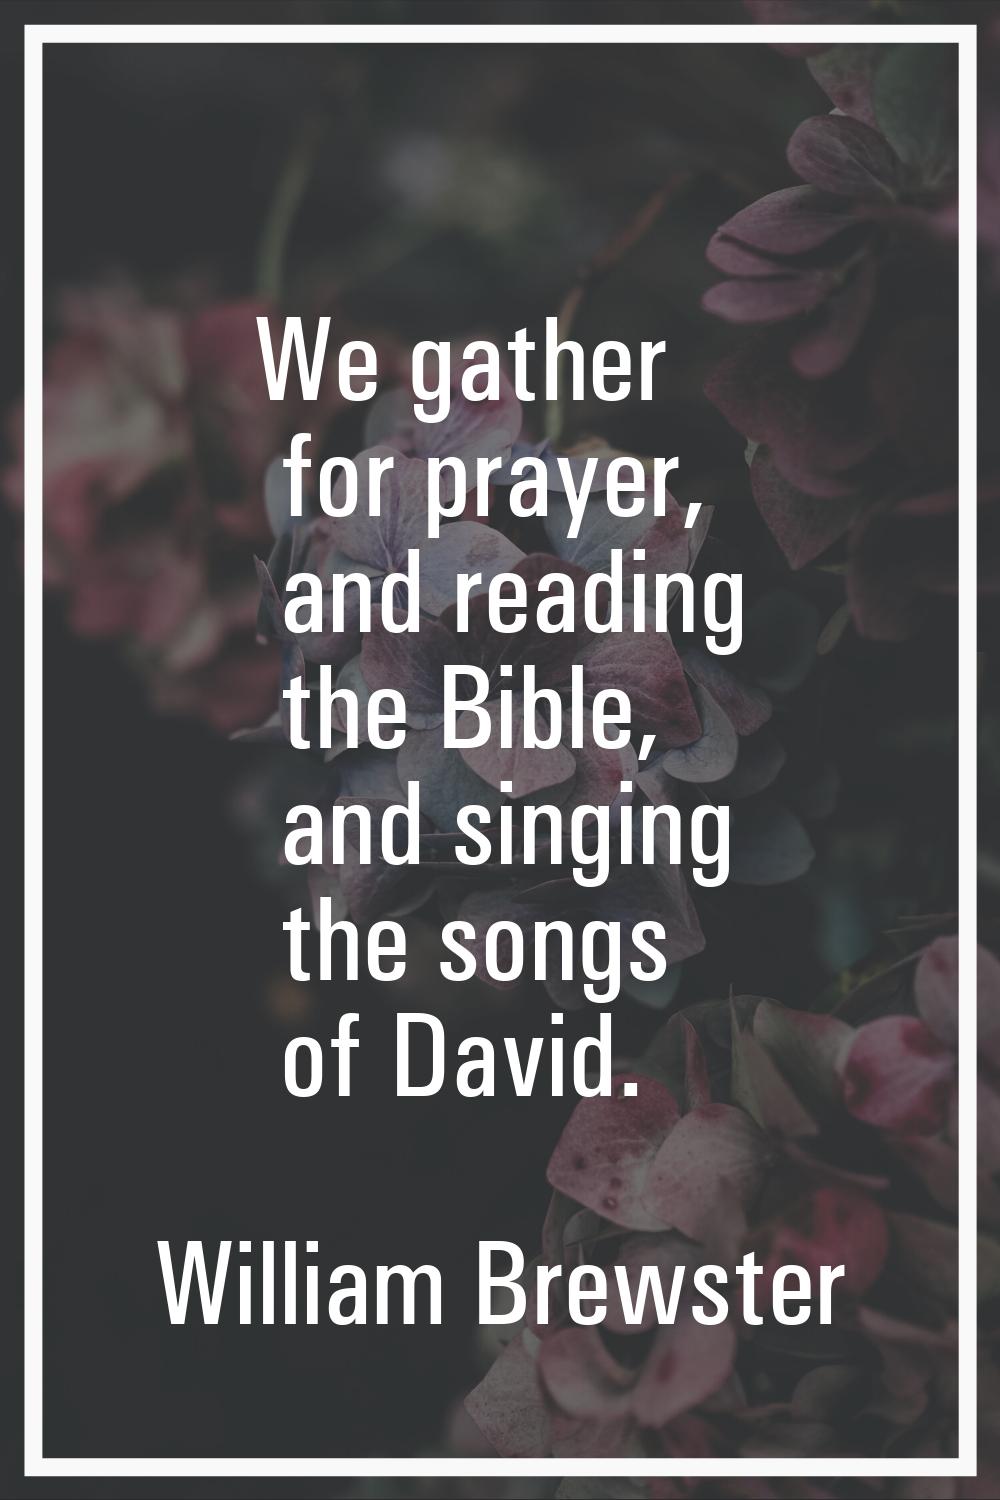 We gather for prayer, and reading the Bible, and singing the songs of David.